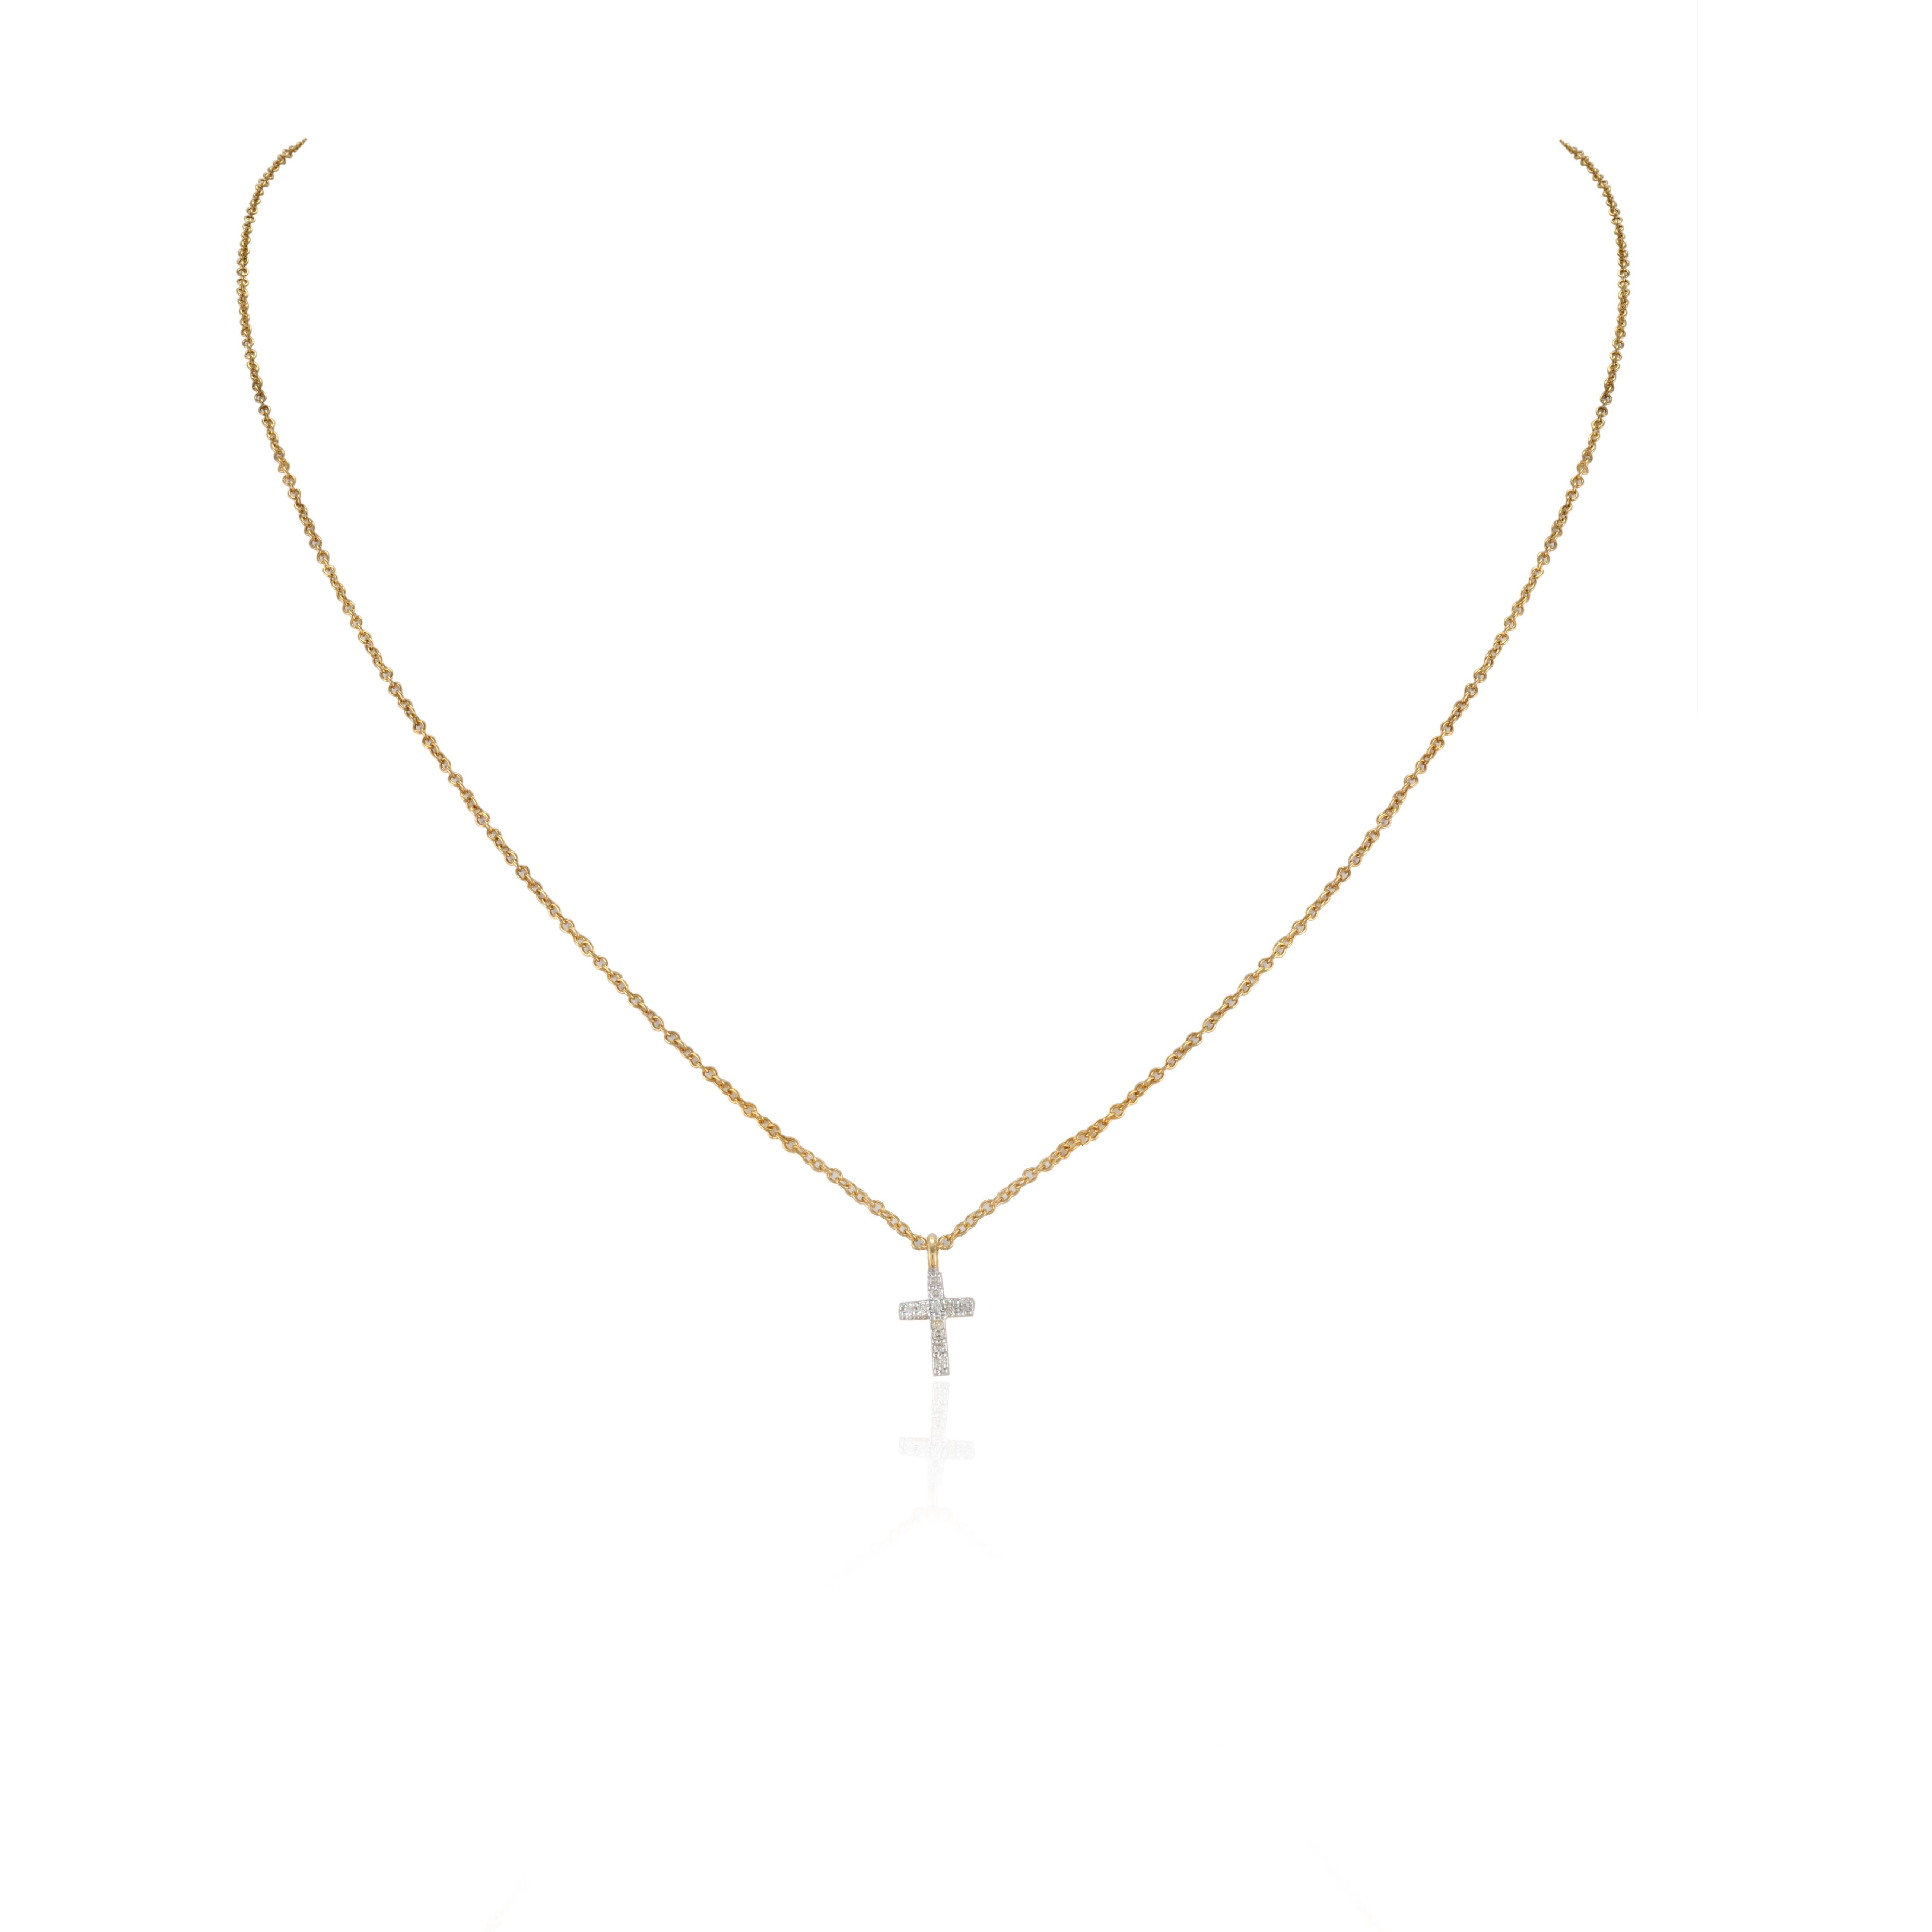 Dainty Diamond Studded Cross Pendant Necklace with Chain in 18K Gold studded with round cut diamonds. This stunning piece of jewelry instantly elevates a casual look or dressy outfit. 
April birthstone diamond brings love, fame, success and